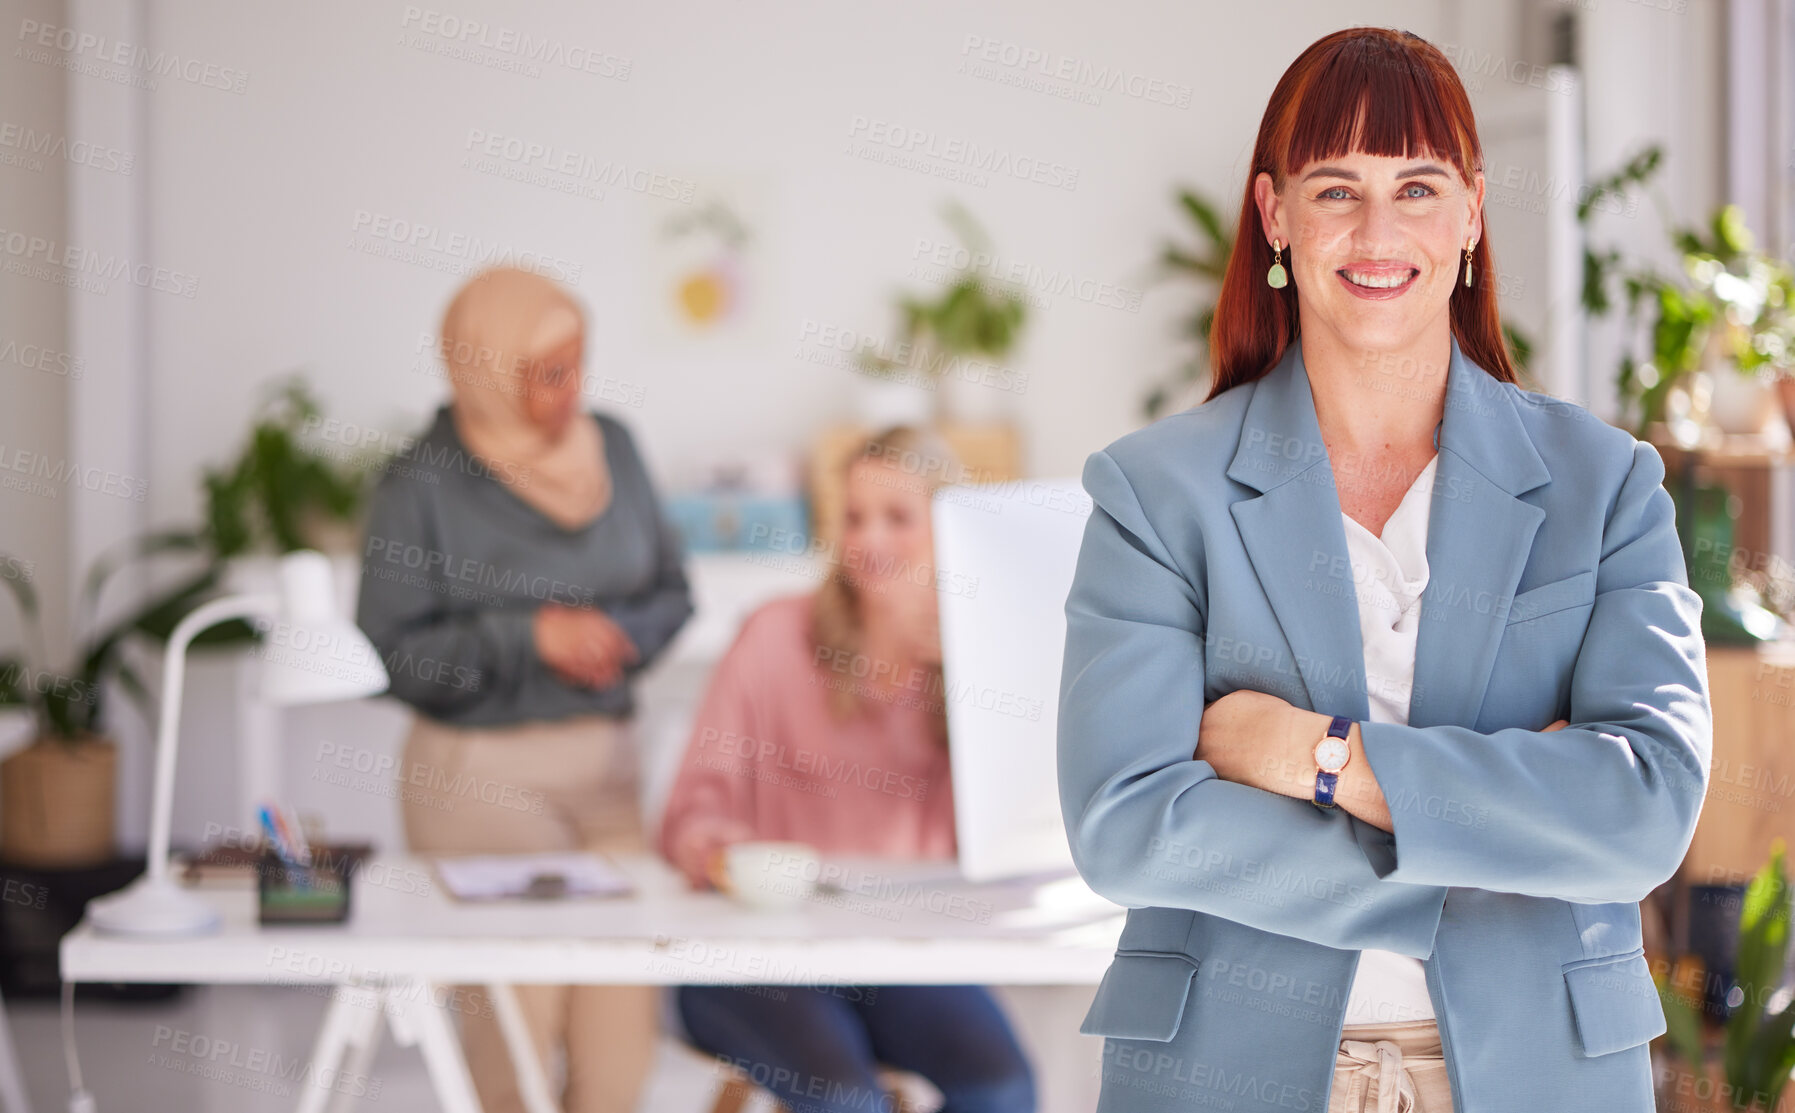 Buy stock photo Leadership, success and portrait of business woman with arms crossed, confident in meeting. Teamwork, support and female employee working together on idea, project and planning in creative workspace